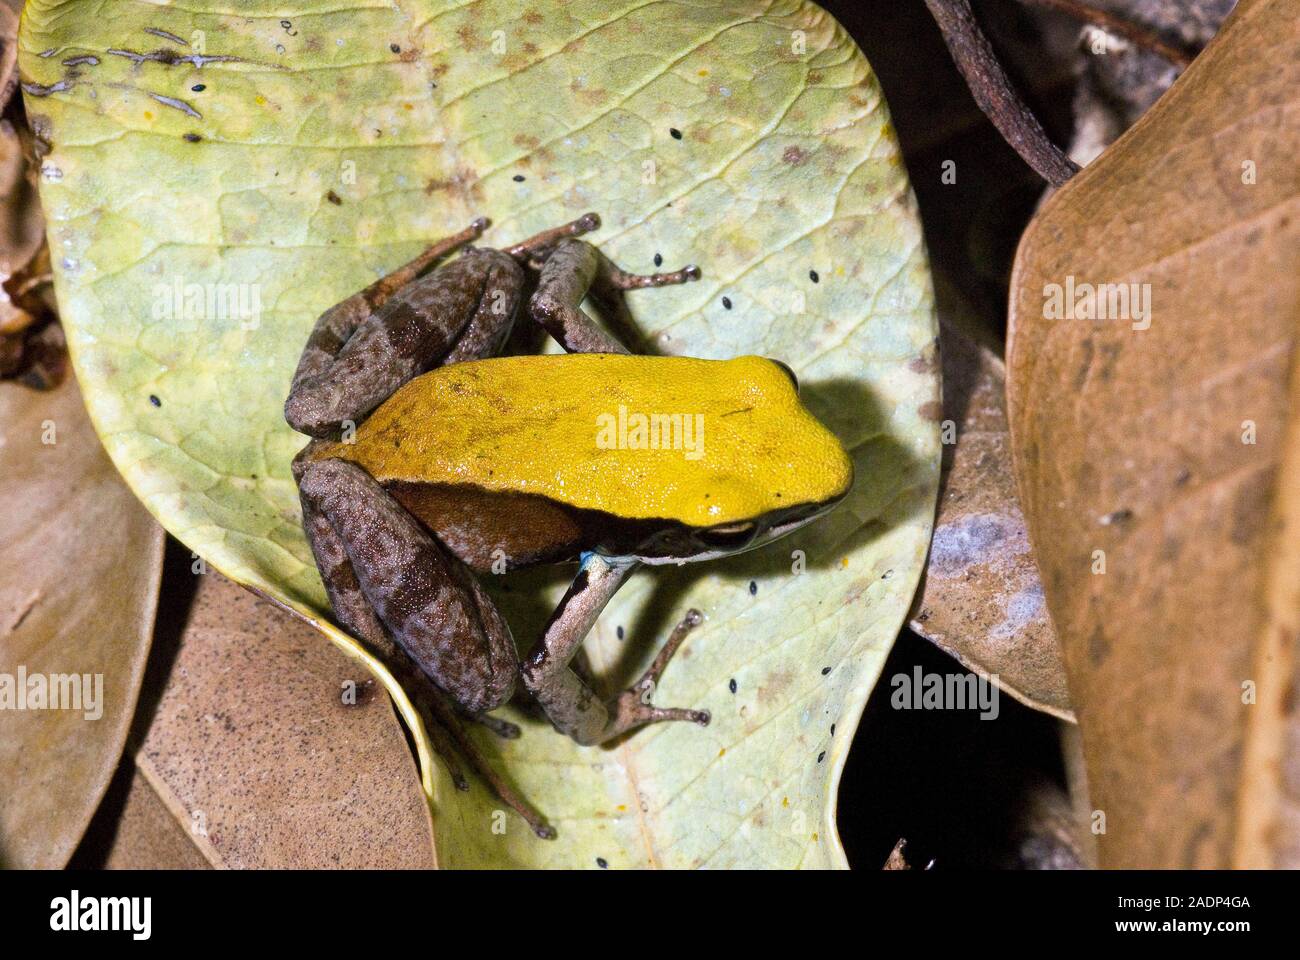 Brown mantella frog (Mantella betsileo) on a leaf. Brown mantella are endemic to Madagascar where their natural habitat is widely variable. Most speci Stock Photo